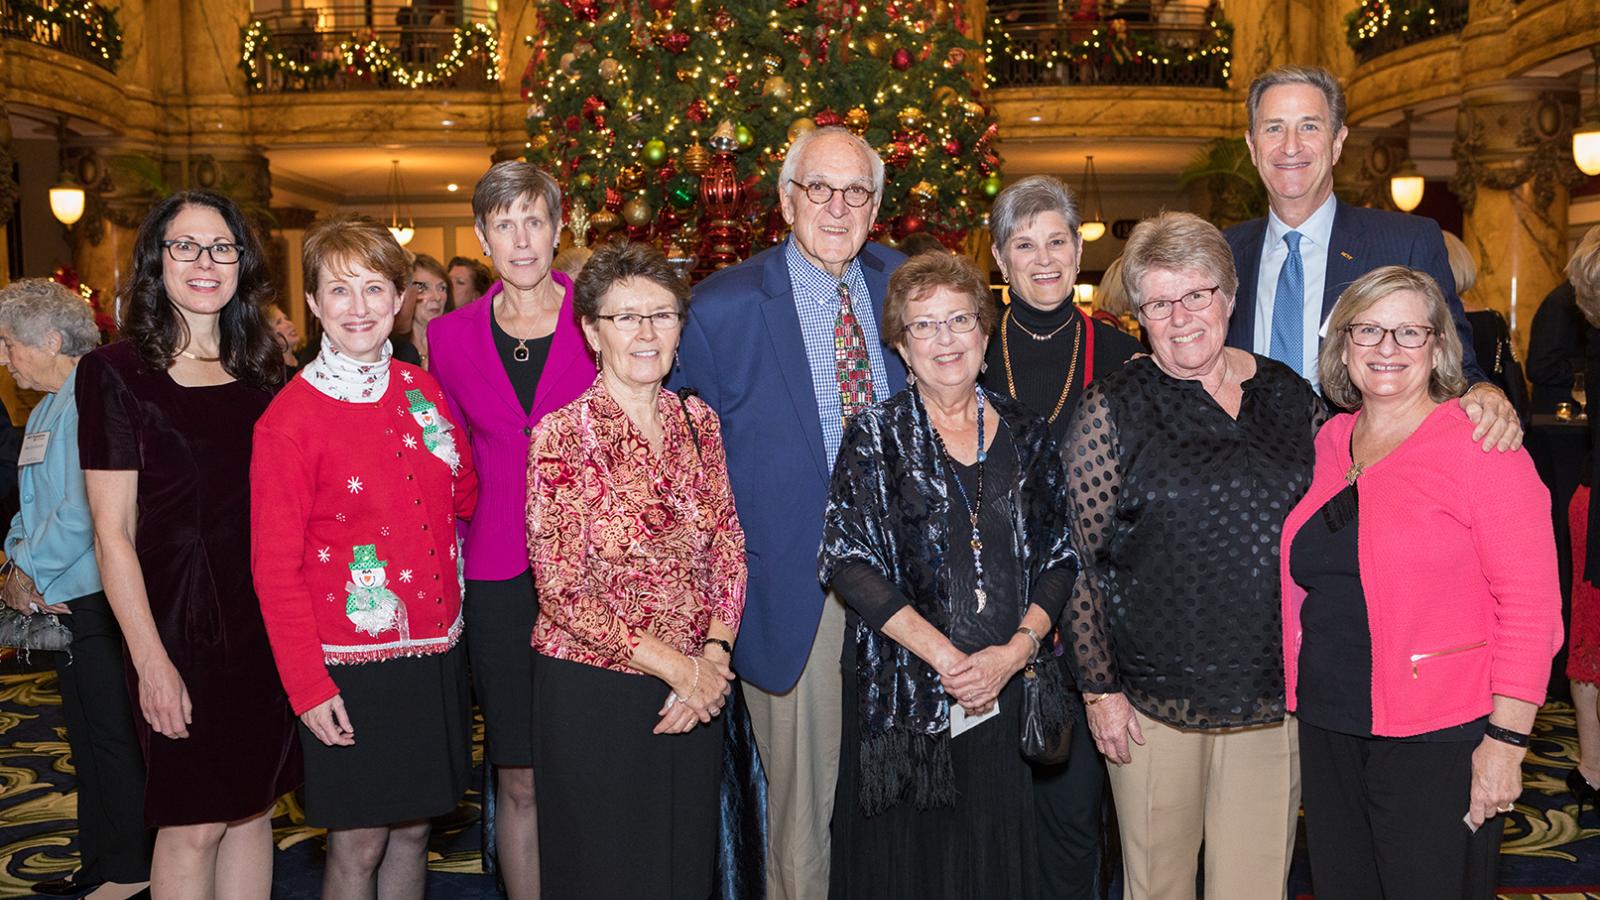 (L to R) Dawn Goldstein, Ph.D.; Debbie Shockey, D.N.P; Dean Jean Giddens, Ph.D; Barbie Dunn, Ph.D.; Joe Teefey; Ginger Edwards; Judy Collins; Mimi Bennett; MCV Foundation board chair Harry Thalhimer; and Carla Nye, D.N.P., at the MCV Foundation’s December board meeting reception, where the foundation honored and raised funds for the VCU School of Nursing Clinical Scholars Program.